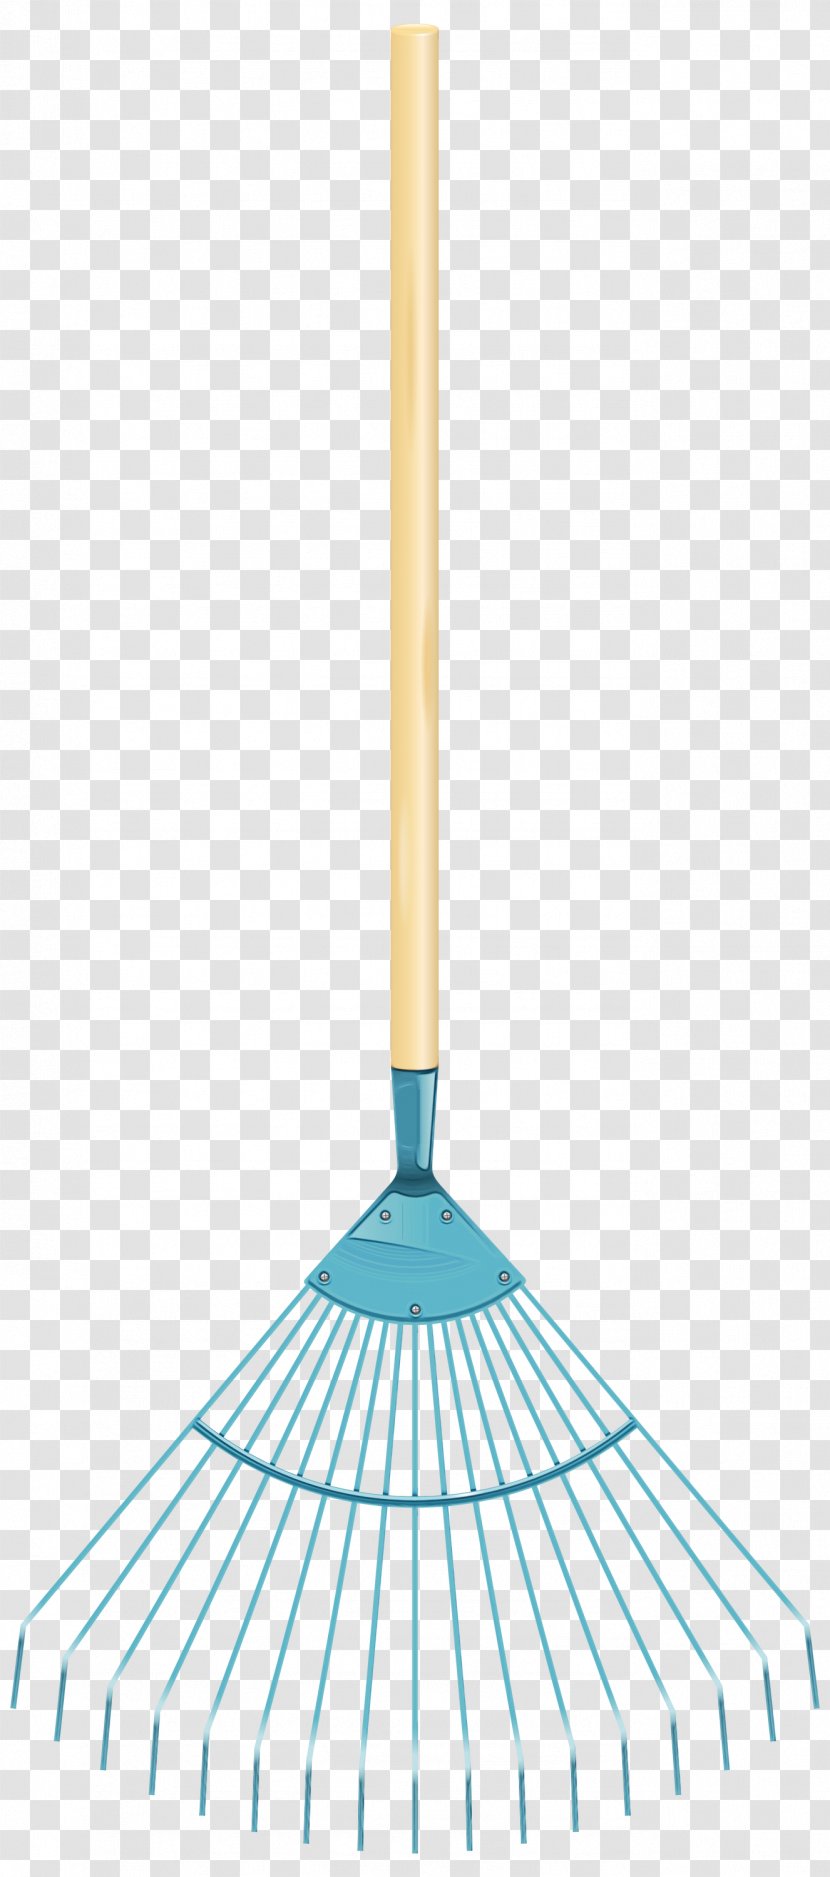 Angle Household Cleaning Supply - Rake Broom Transparent PNG